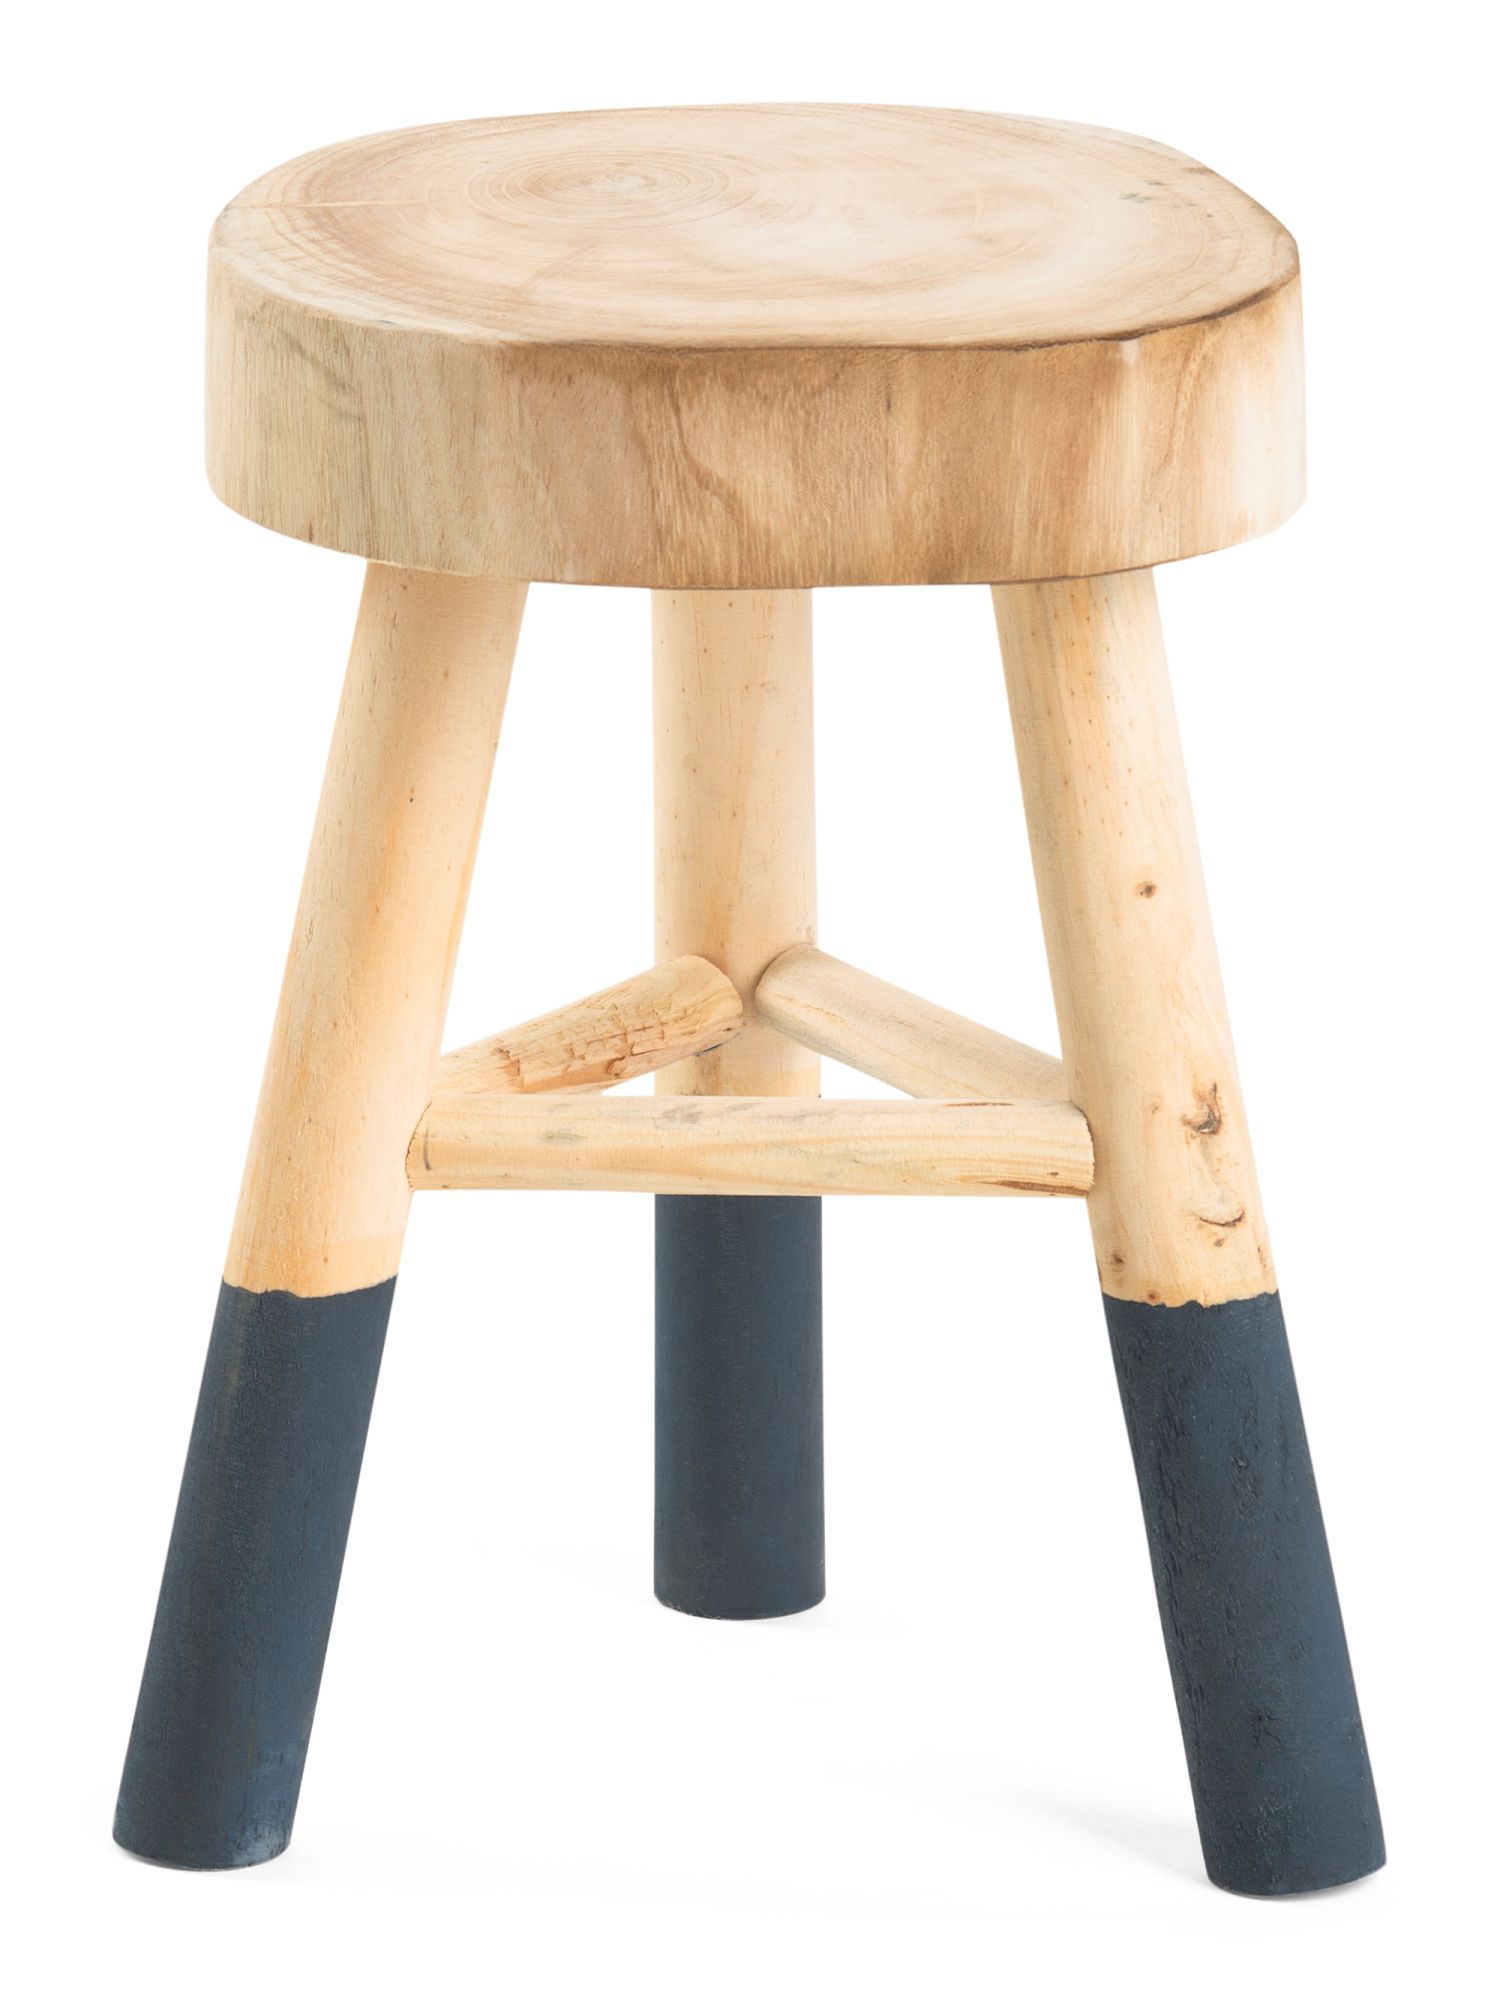 18in Wooden Stool With Dipped Legs | TJ Maxx